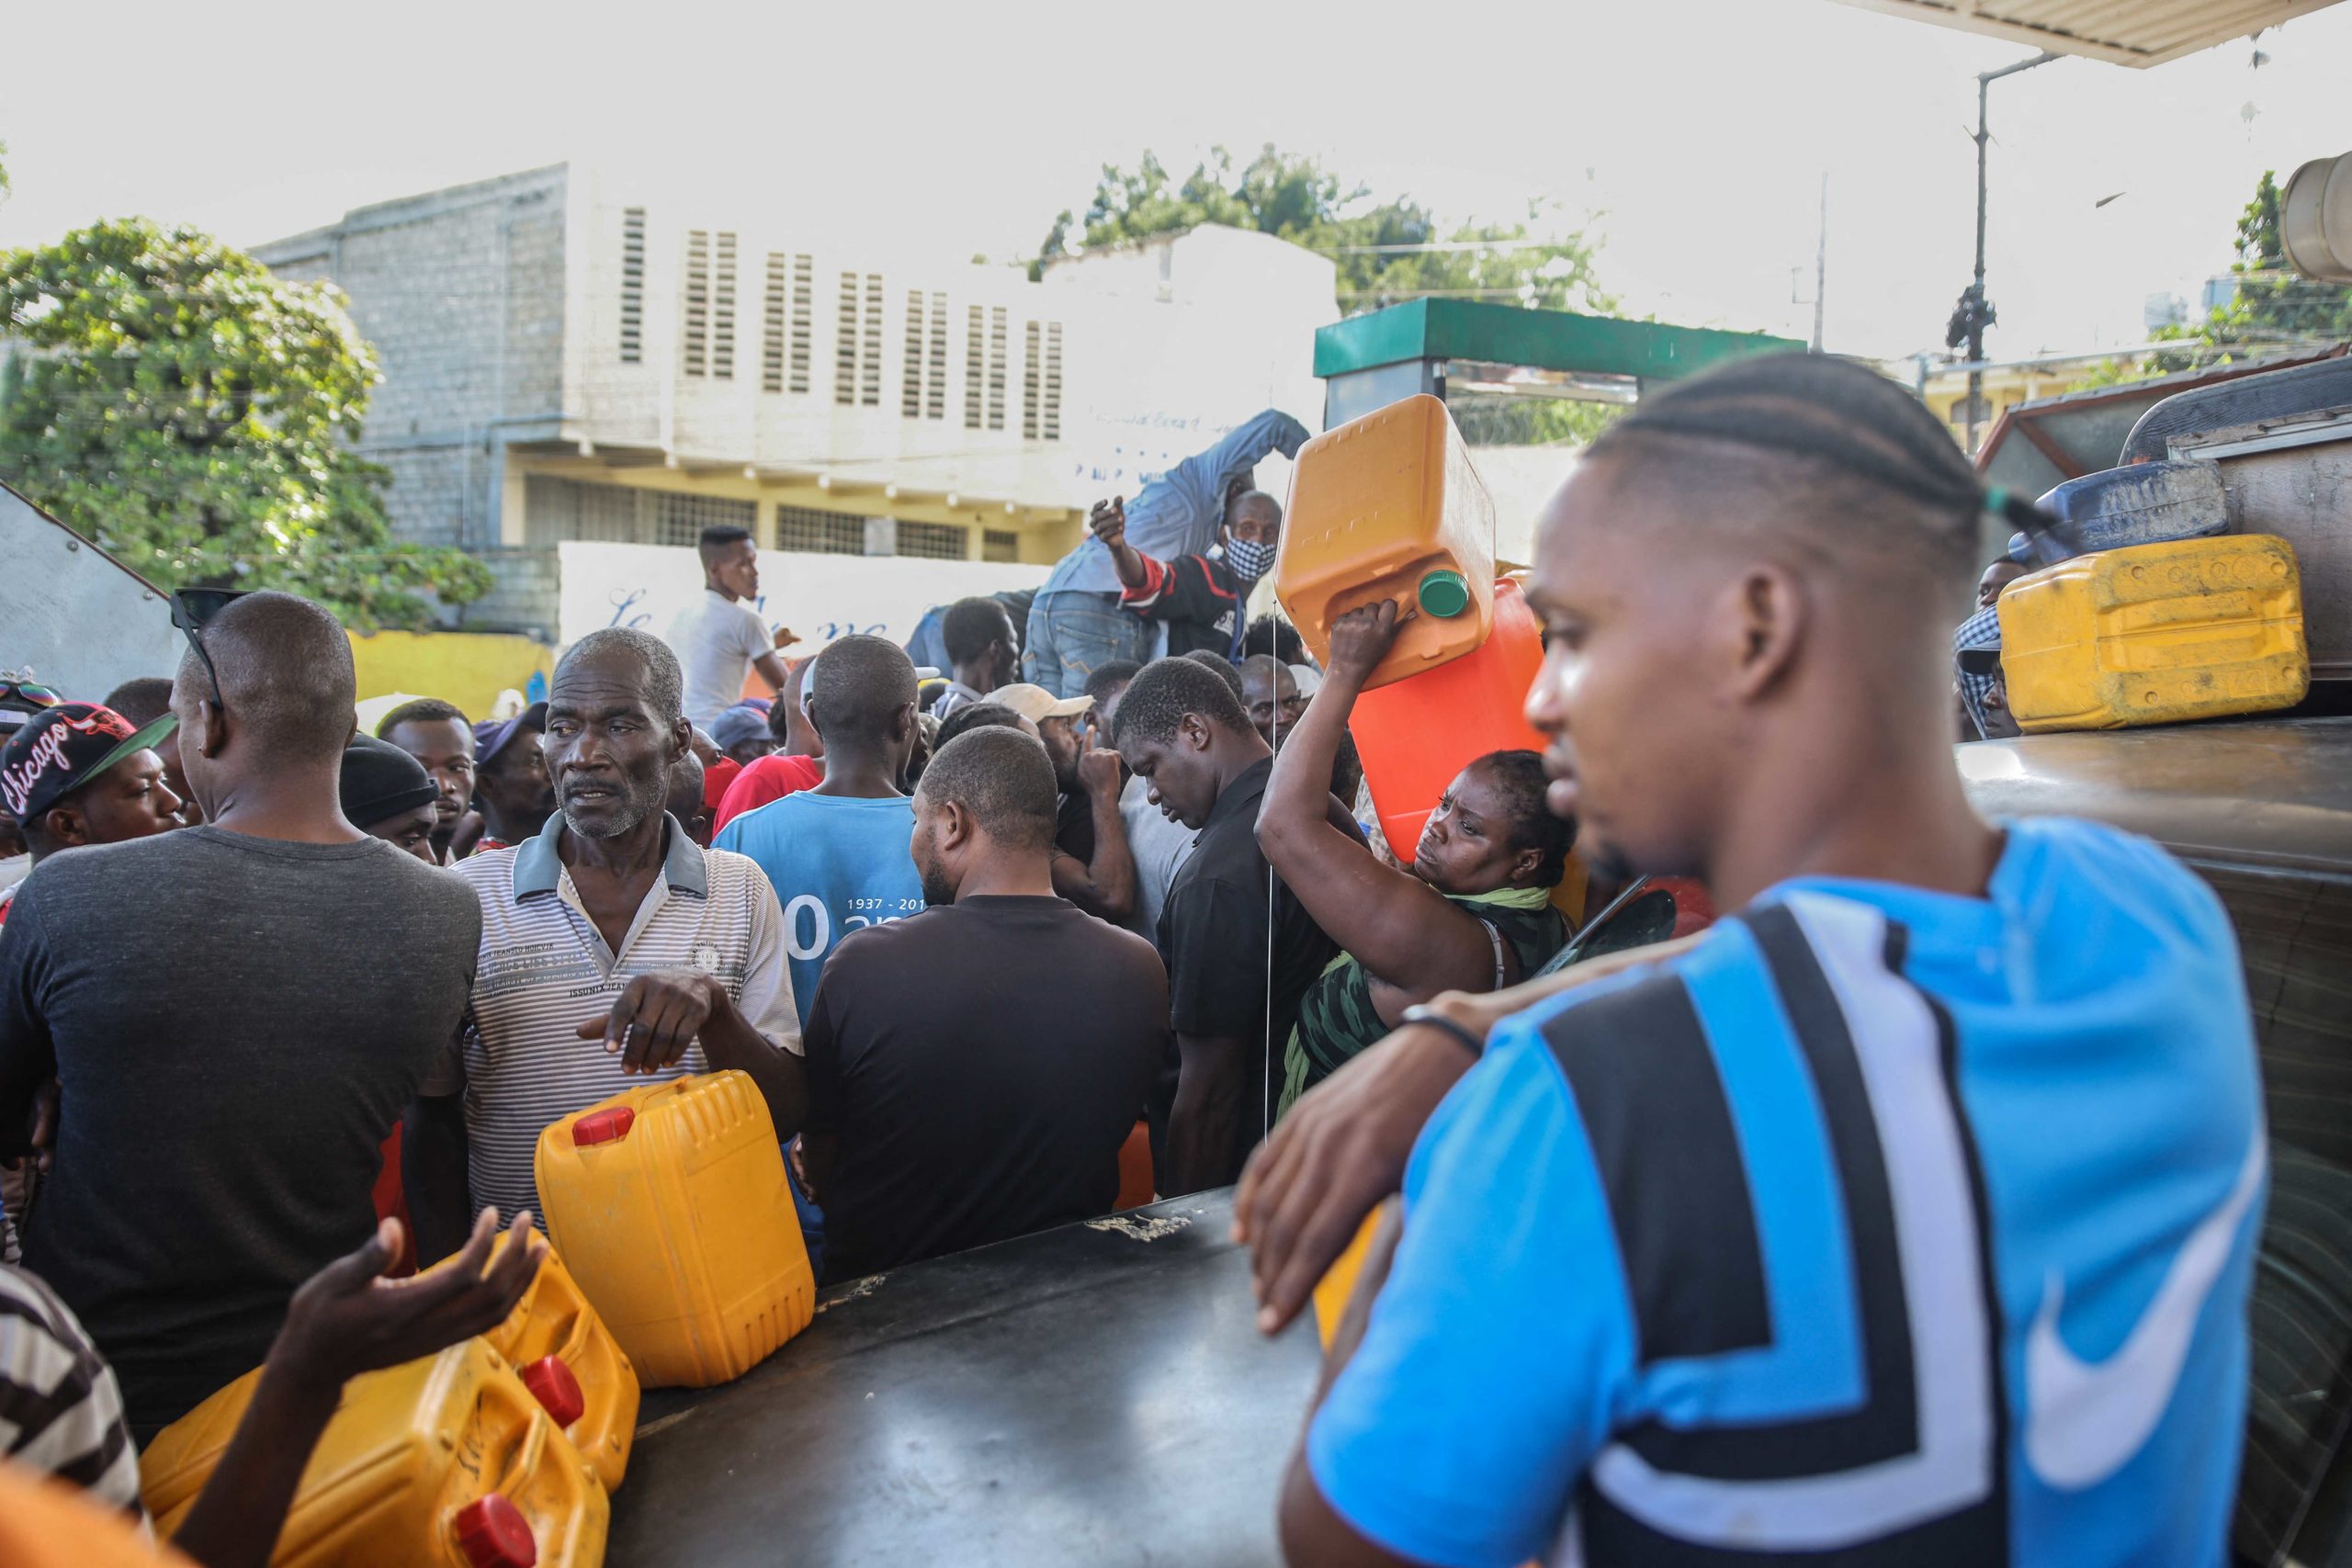 People line up with empty jerry cans at a gas station of Port-au-Prince, Haiti on November 1, 2021. (Photo by RICHARD PIERRIN/AFP via Getty Images)